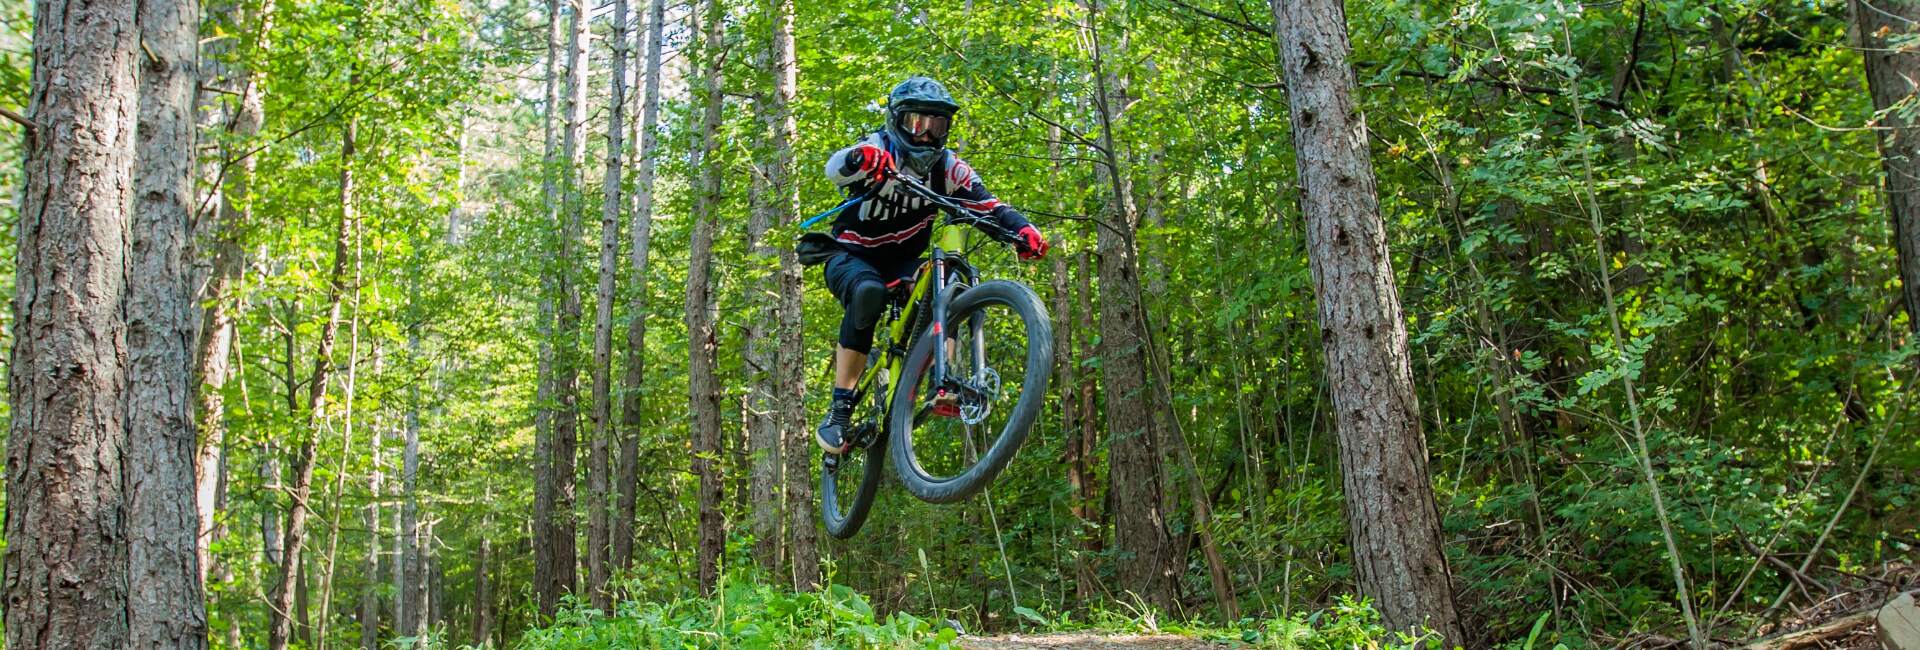 extreme mountain biker catches air on a trail in the woods